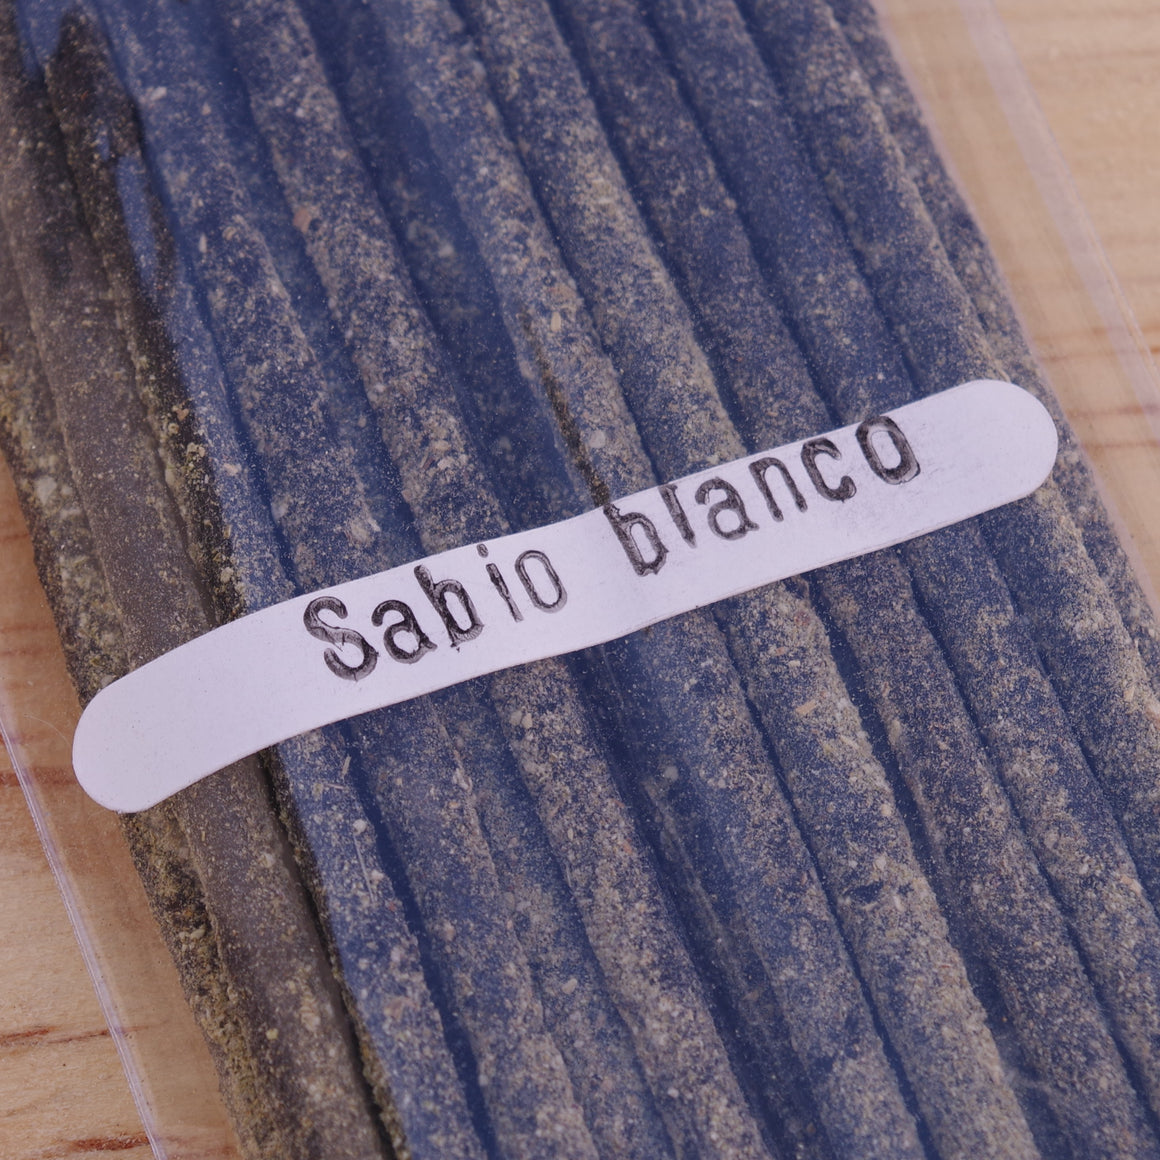 200 White Sage Incense Sticks Handrolled In Mexico